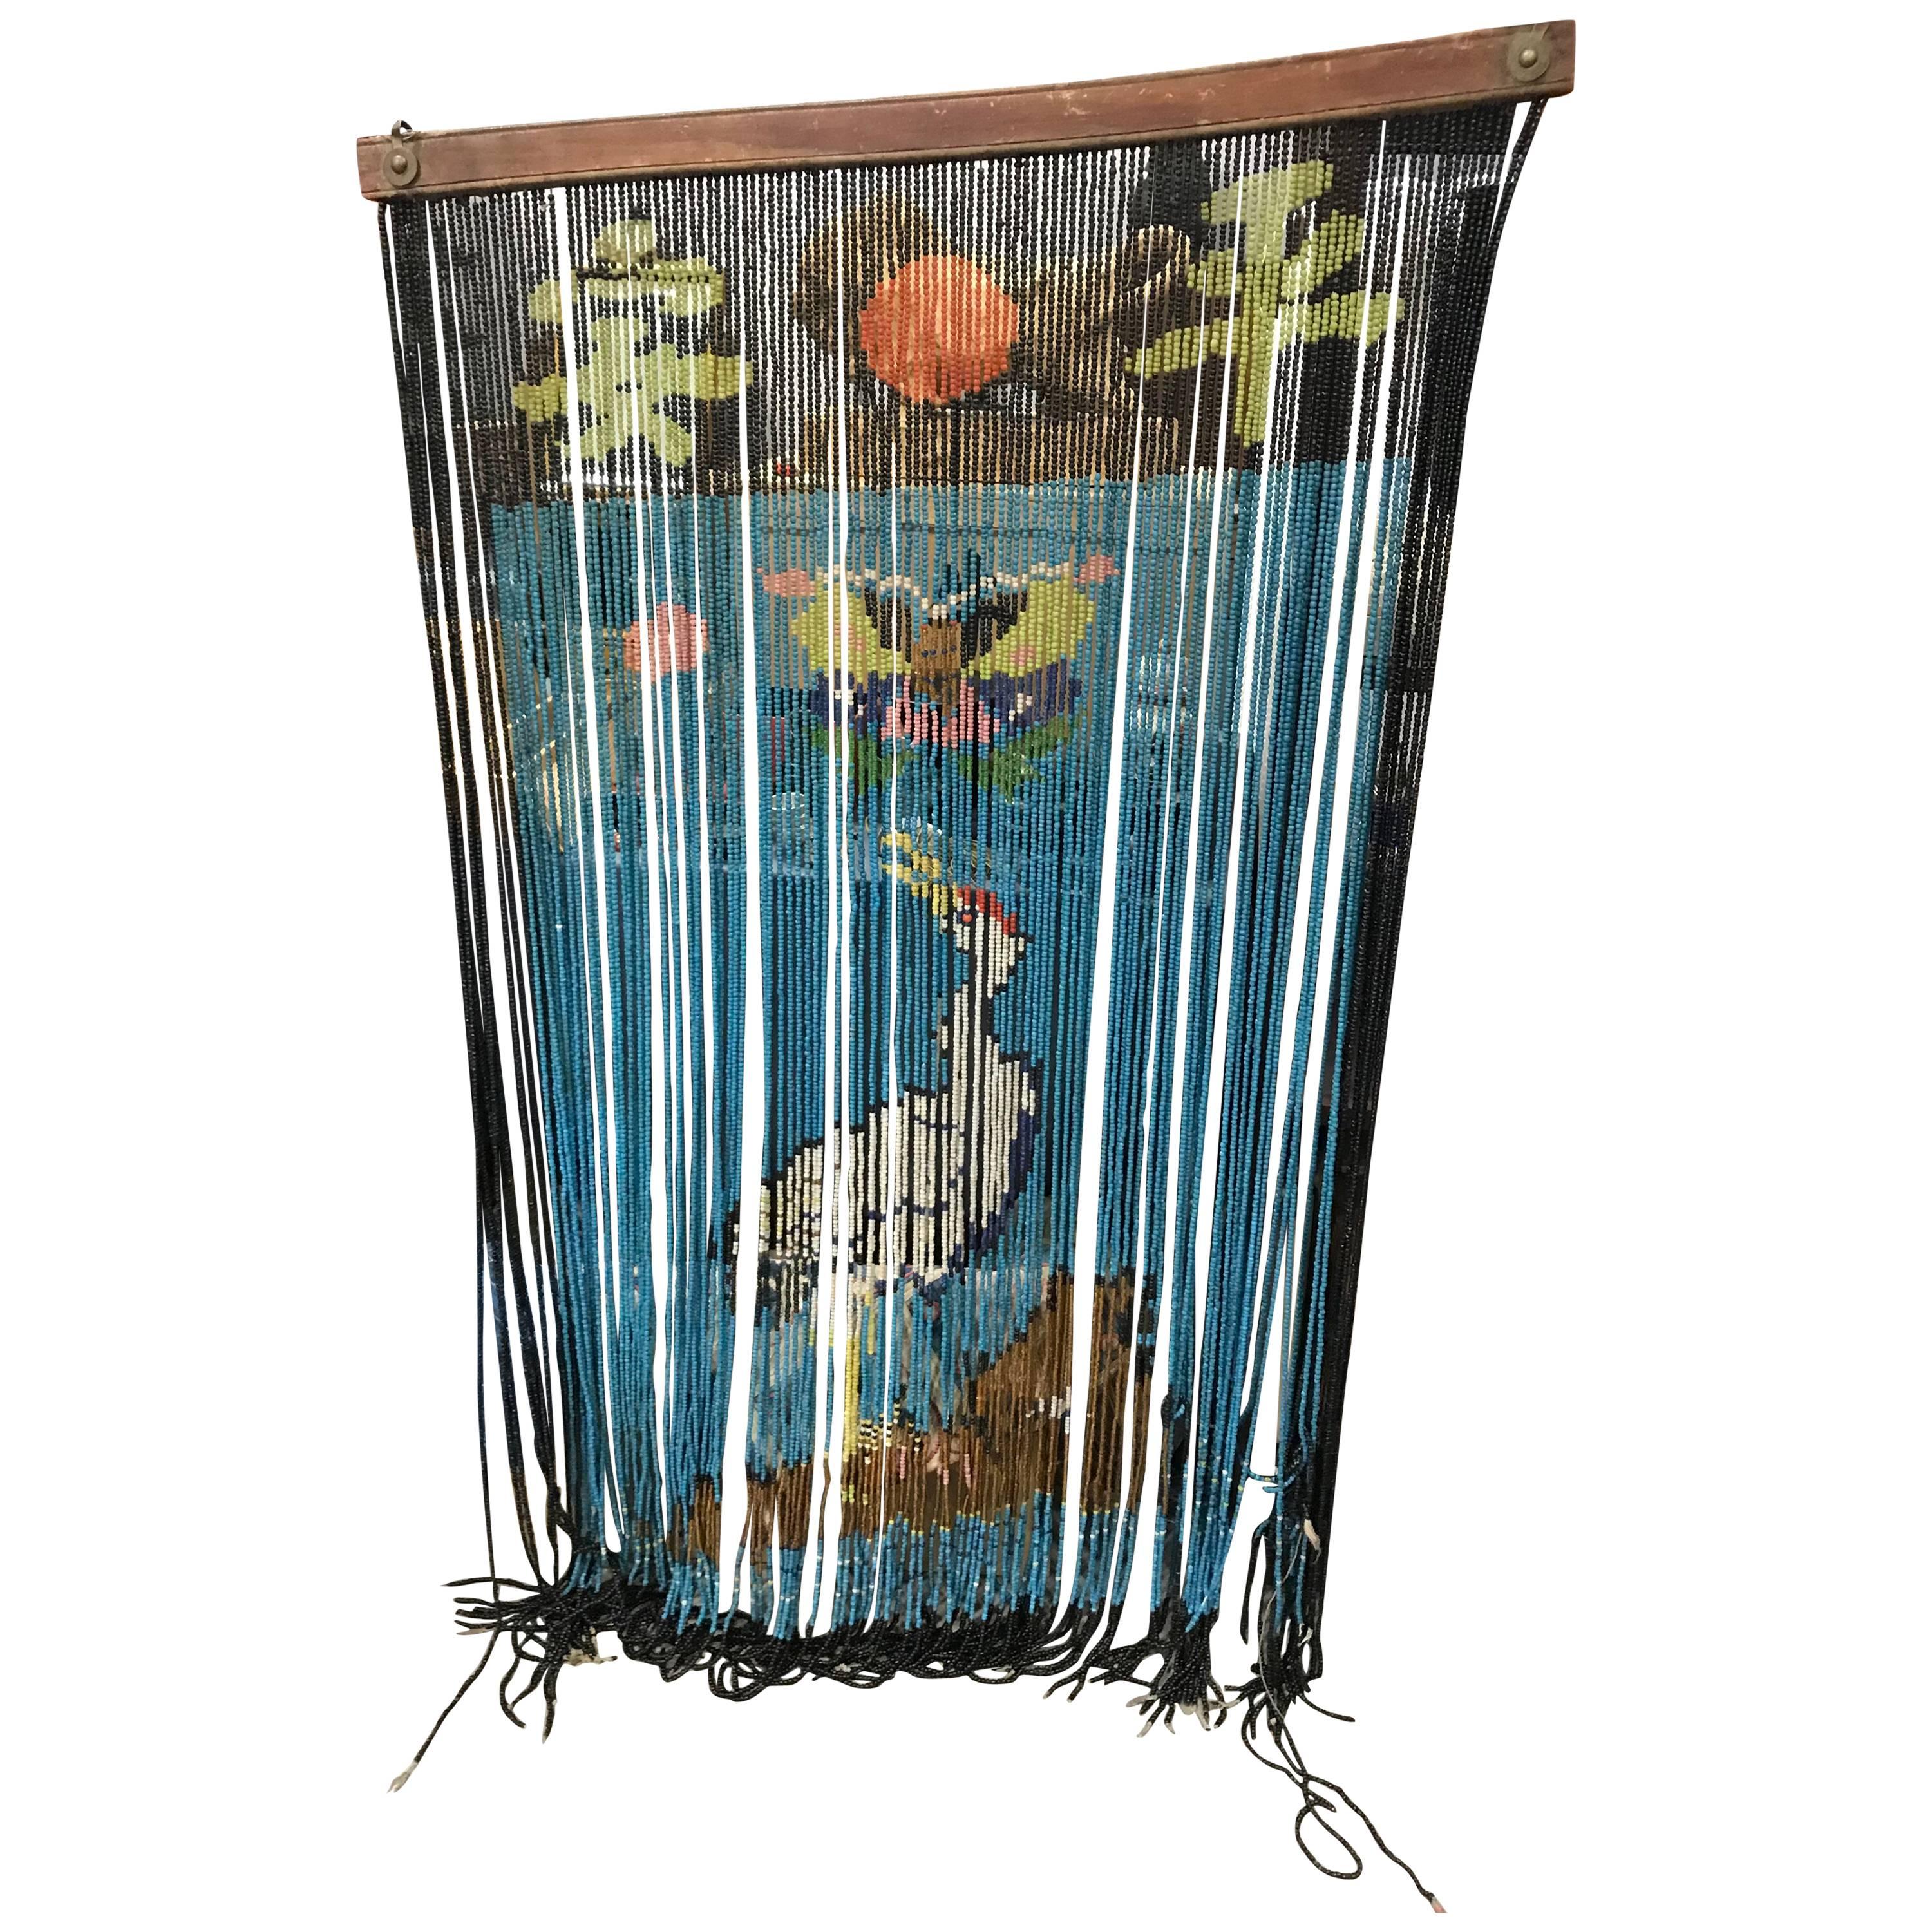 An exceptional one-of-a-kind find.

Featuring the  kanji -Peace- symbols with auspicious symbols sun and long life crane

This fine quality 100+ year old Japanese handcrafted glass beads curtain or noren (entry way curtain) is hand assembled from